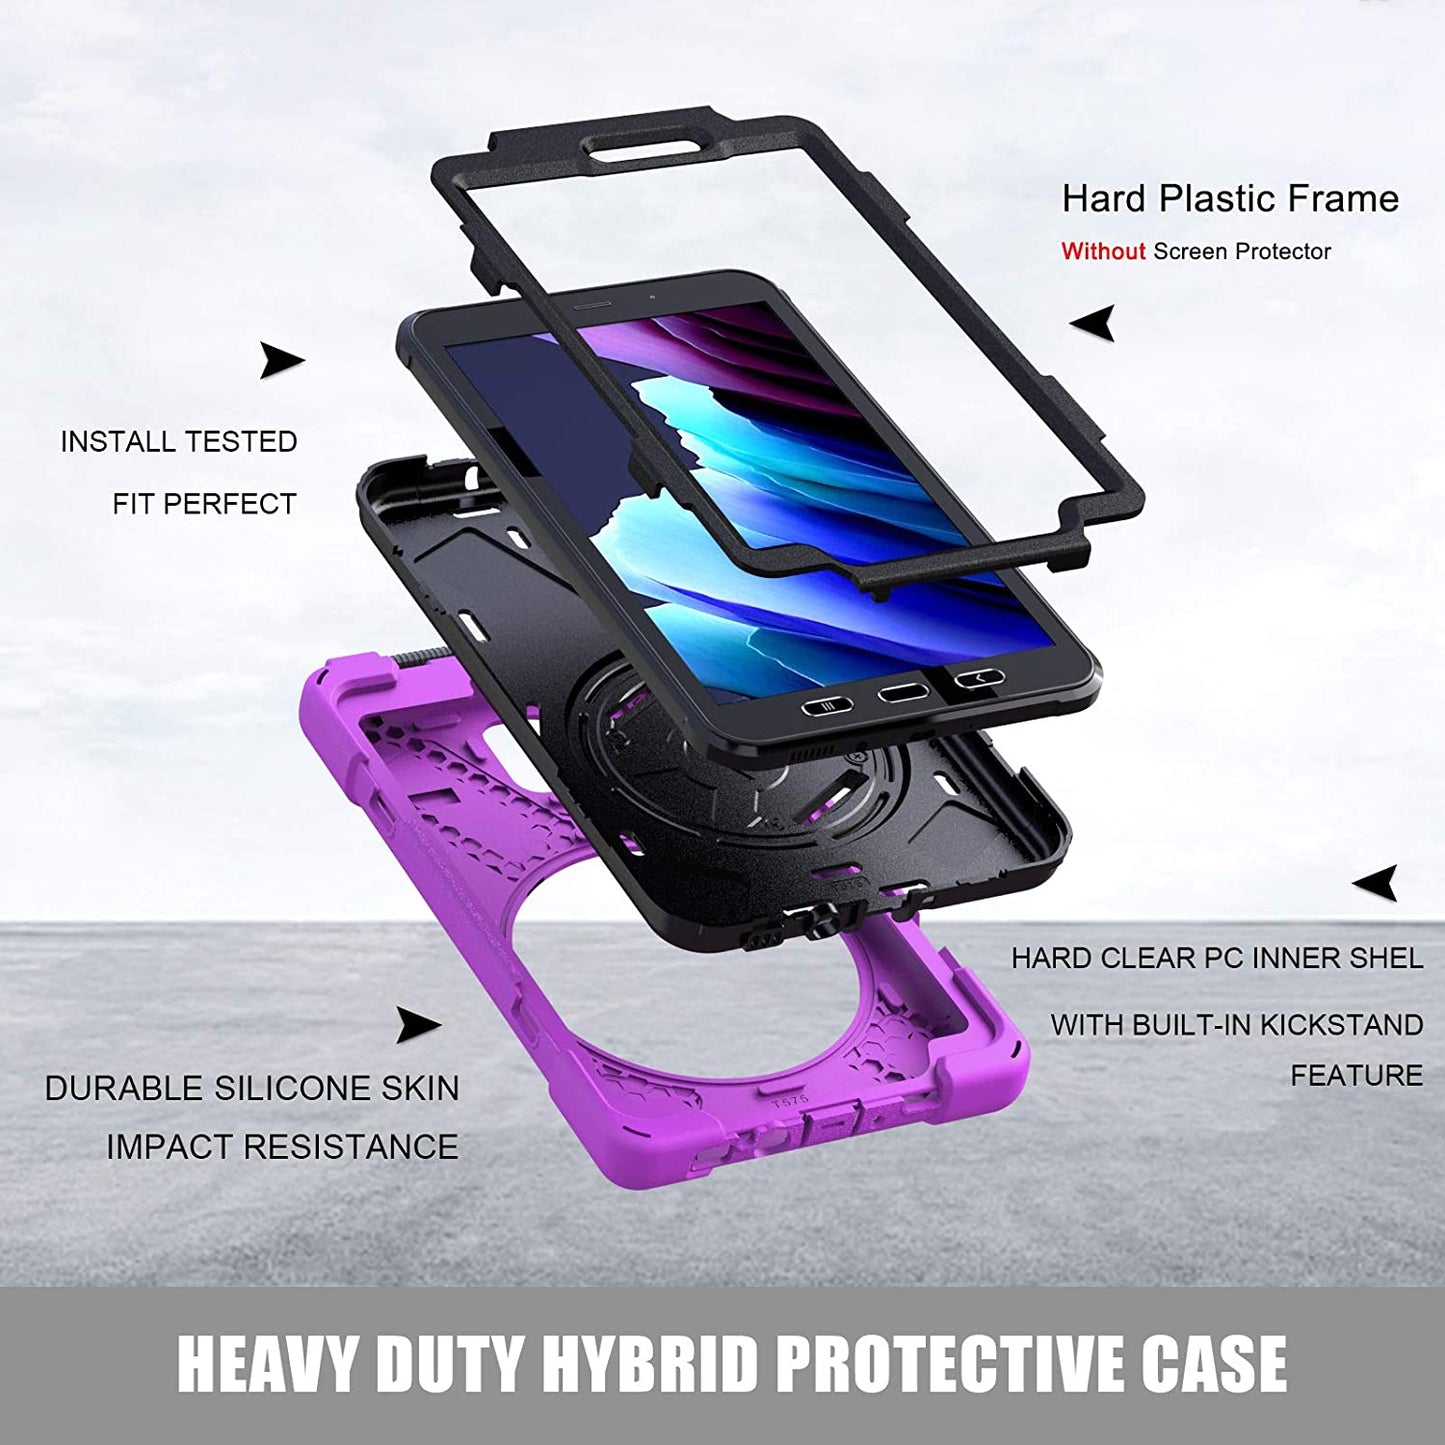 Yapears Samsung Galaxy Tab Active 3 8.0 Case, Heavy Duty Rugged Shockproof Drop Protection Case with 360 Stand, Handle Hand Strap & Shoulder Strap for Galaxy Tab Active3 8" 2020 T570/T575/T577 (Blue)